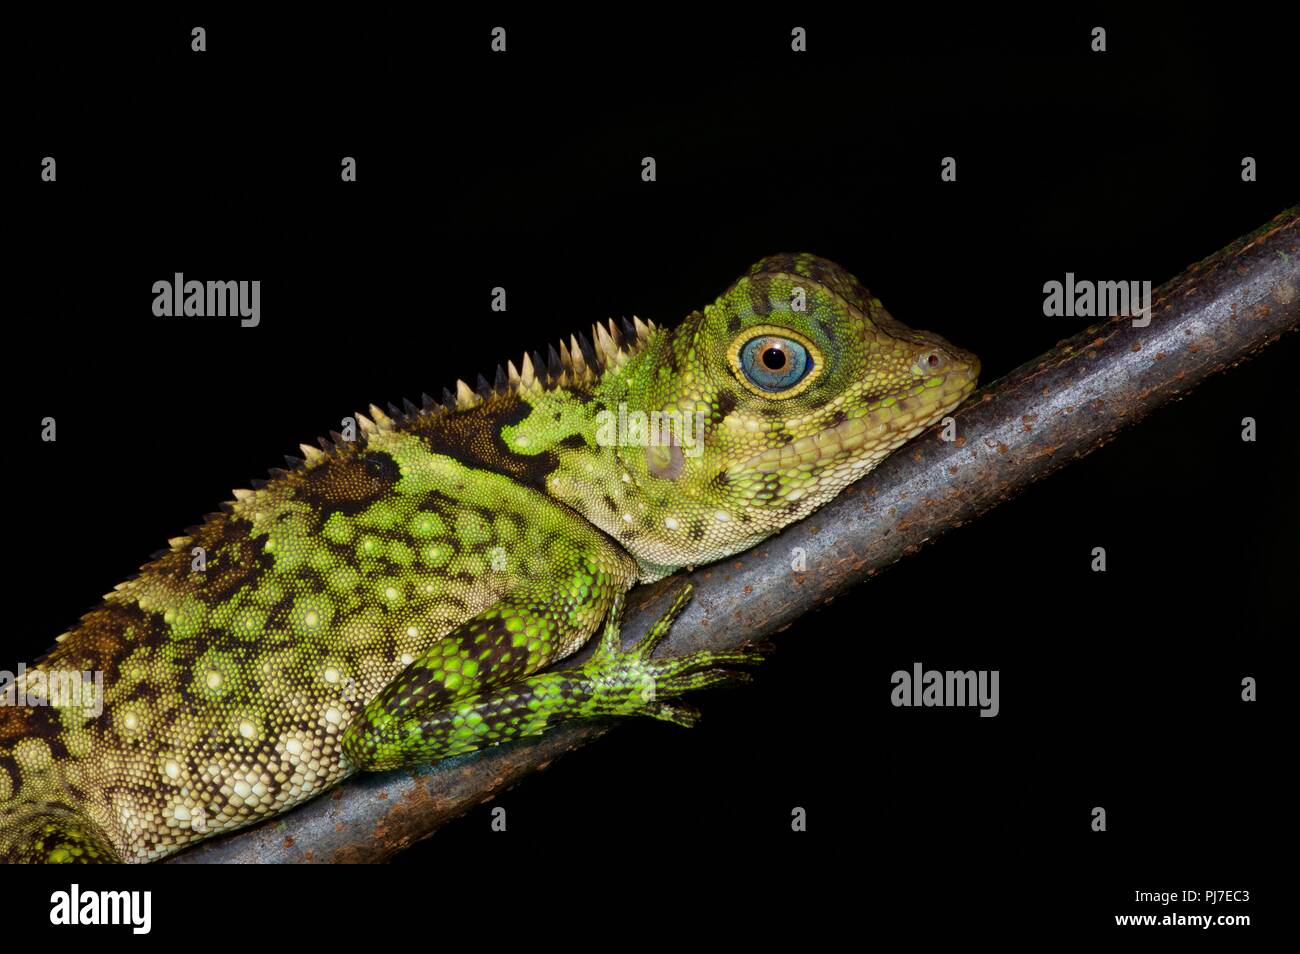 A Blue-eyed Angle-headed Lizard (Gonocephalus liogaster) resting at night in Gunung Gading National Park, Sarawak, East Malaysia, Borneo Stock Photo